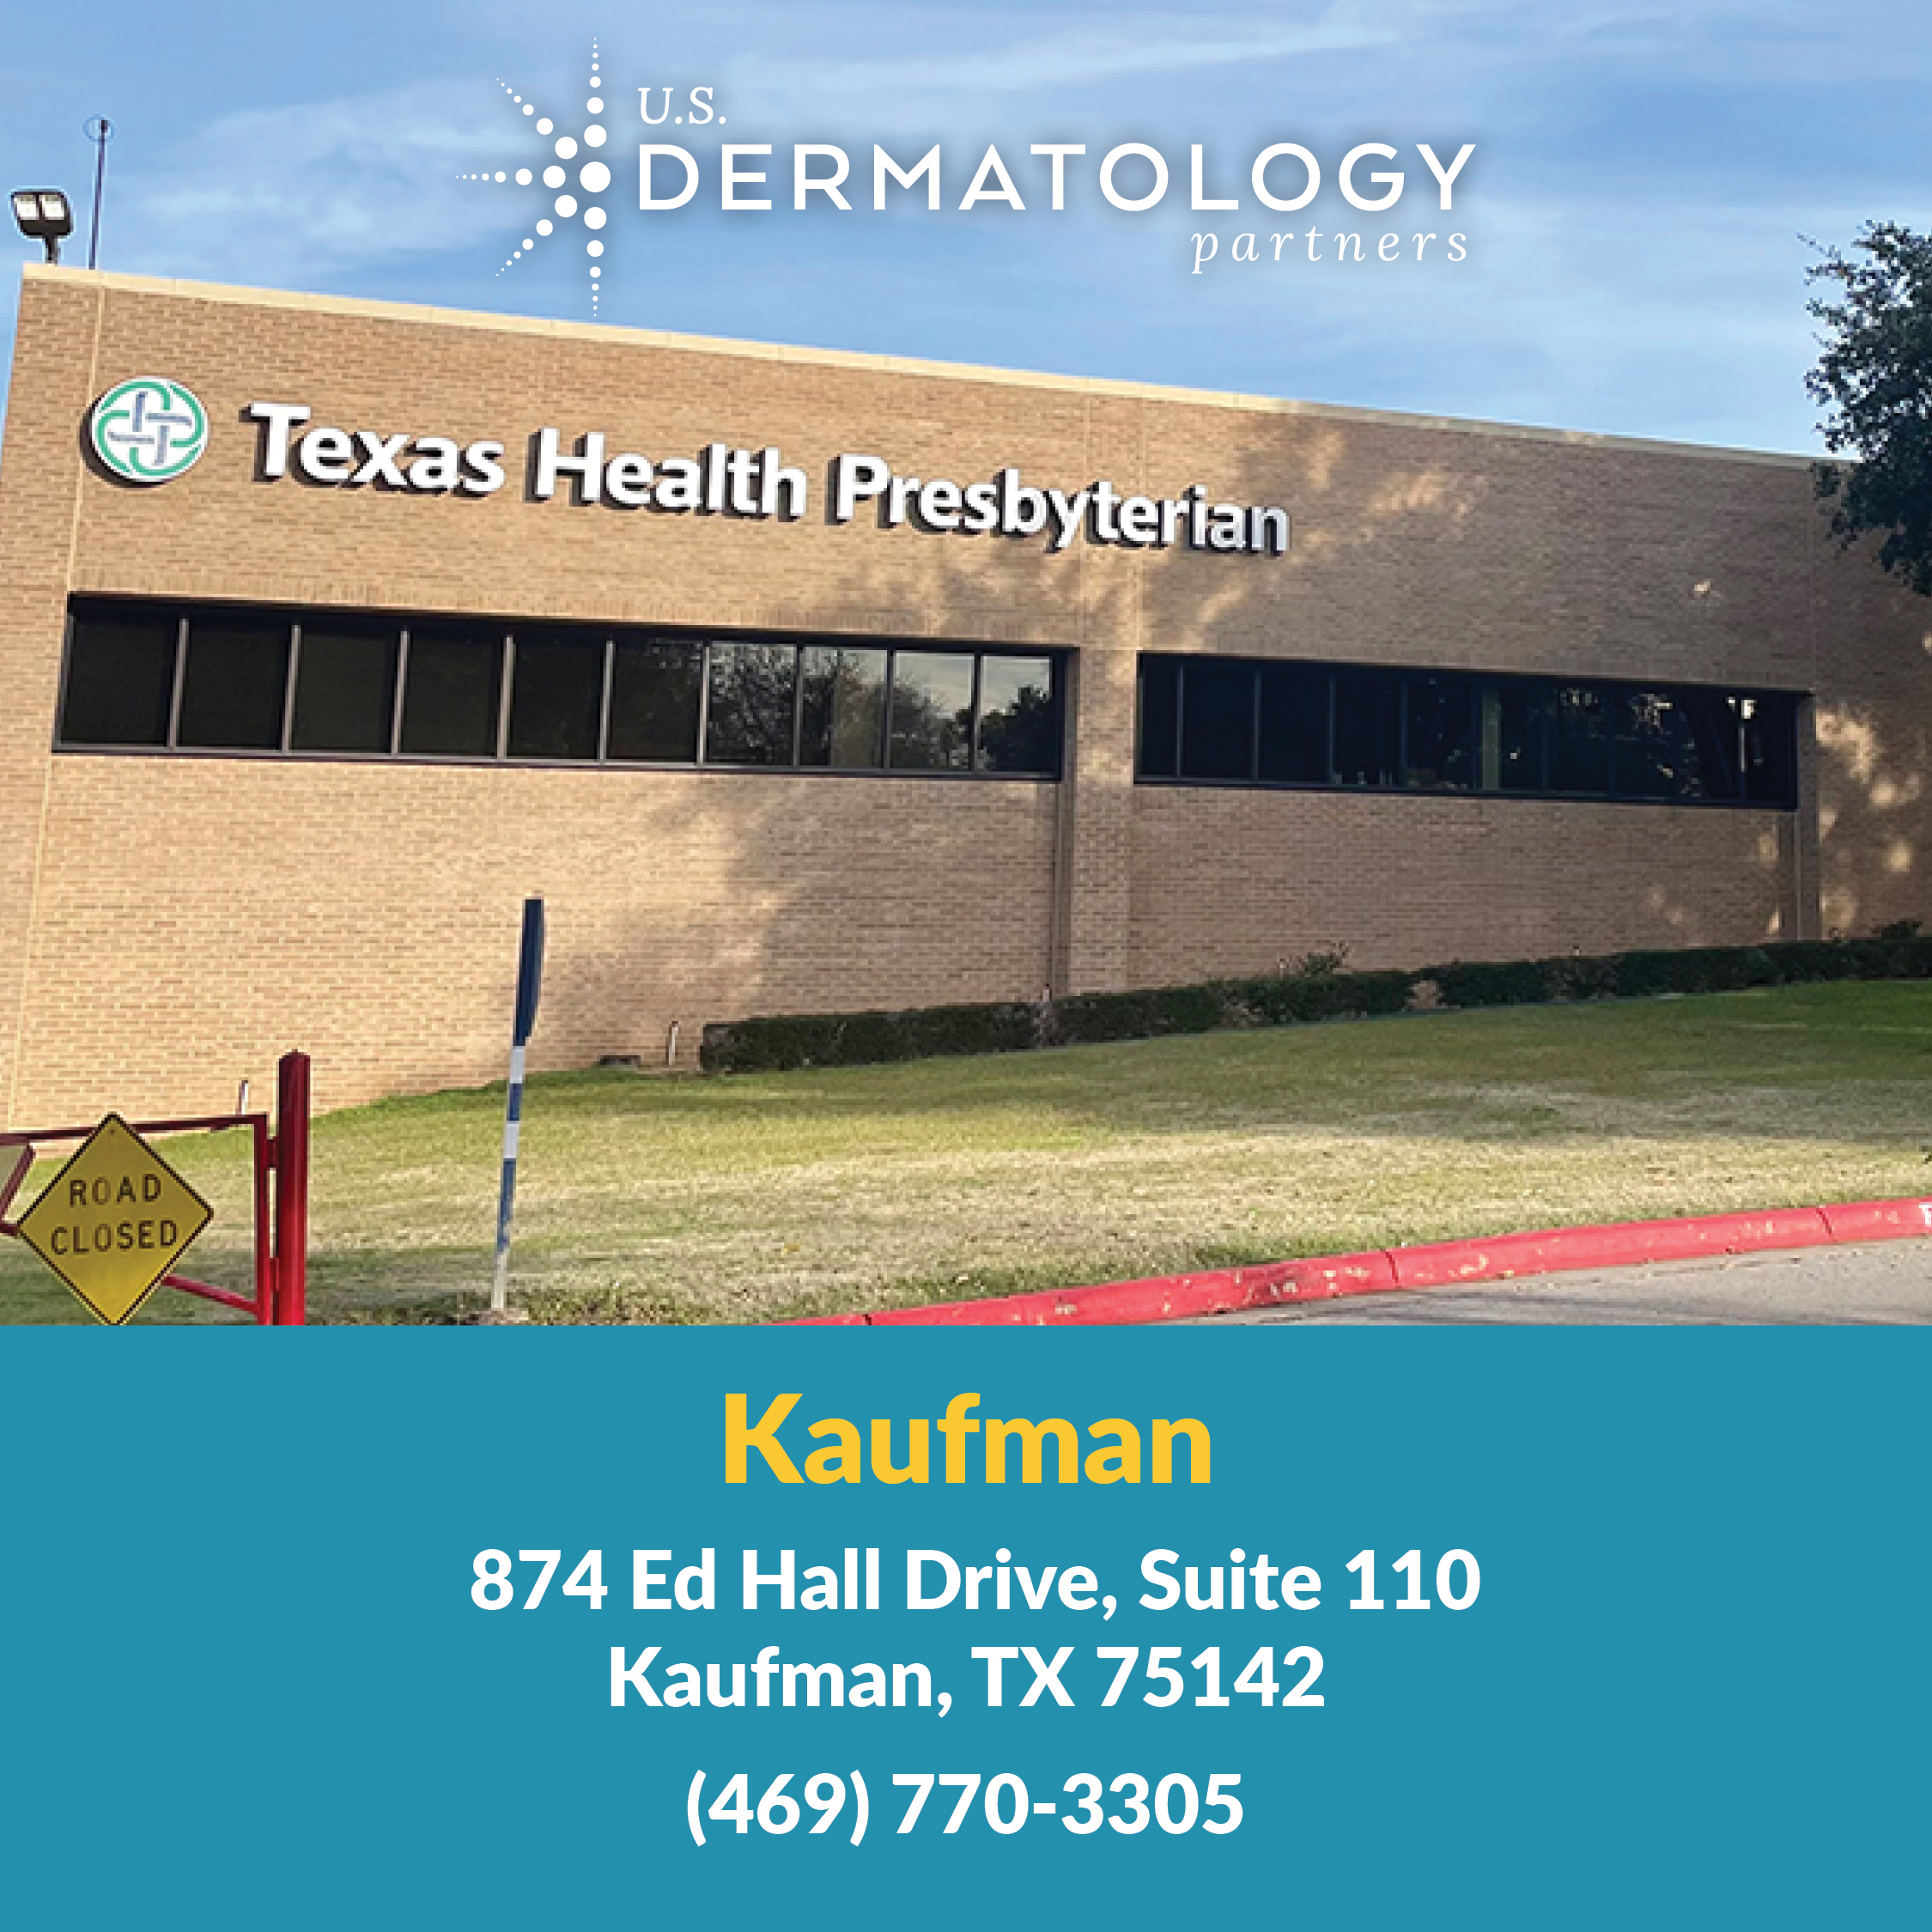 U.S. Dermatology Partners is your specialty dermatologist in Kaufman, Texas. We offer treatment for acne, eczema, skin cancer, & more.